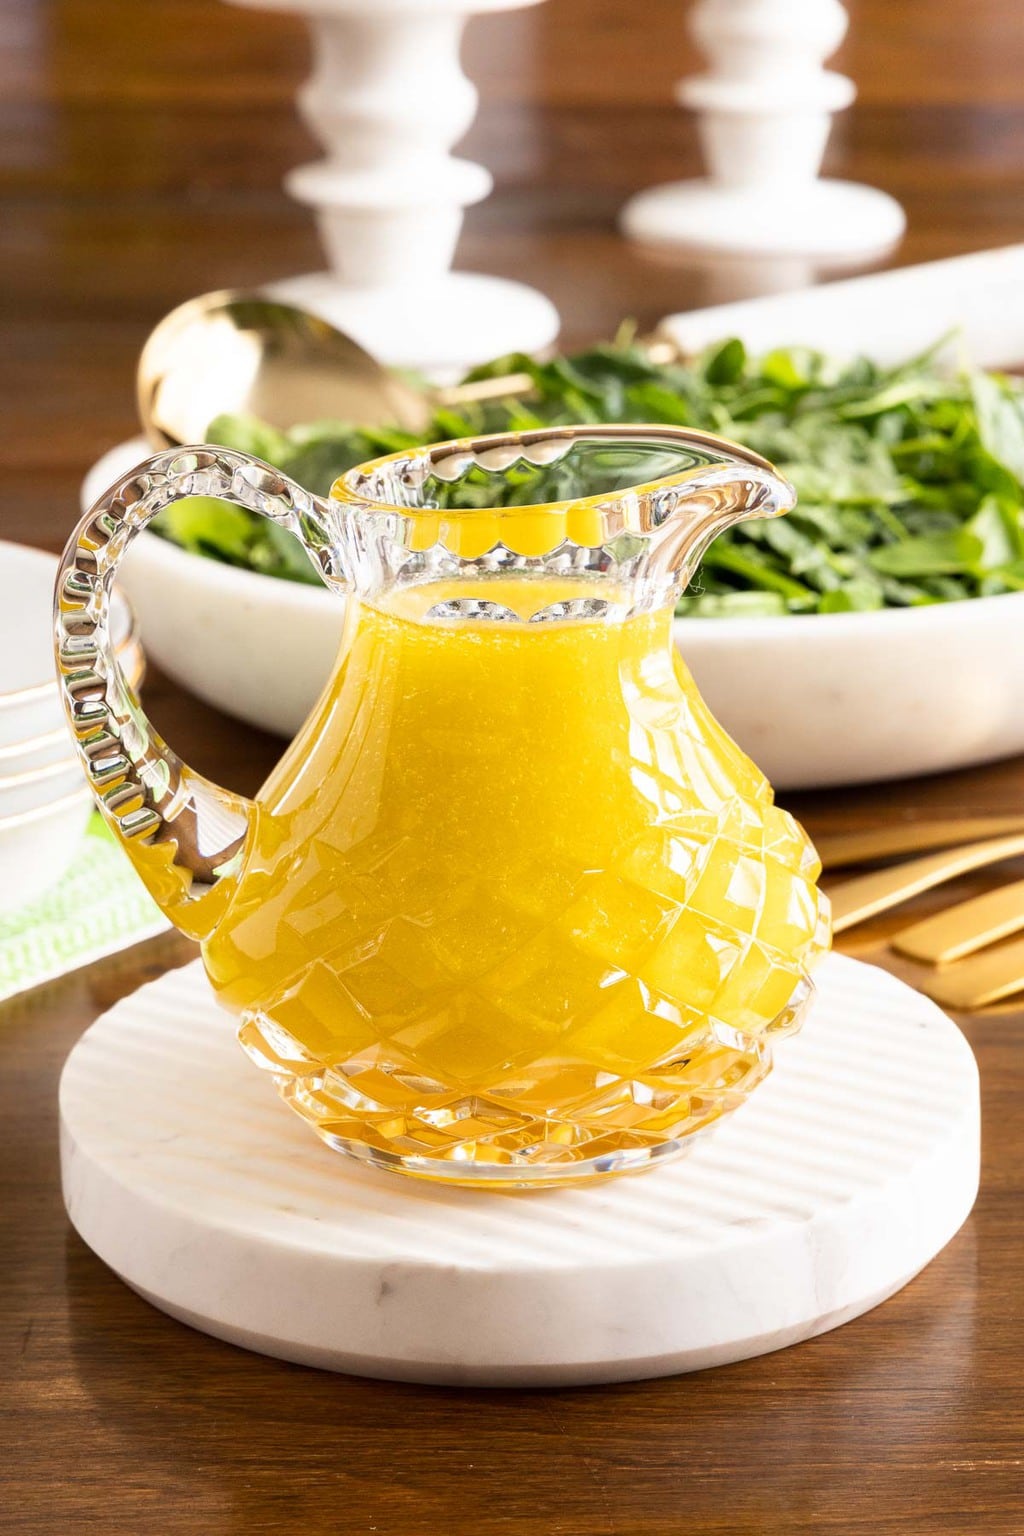 Vertical closeup photo of a cut glass pitcher filled with Honey White Balsamic Dressing on a round marble surface with a spinach salad in the background.